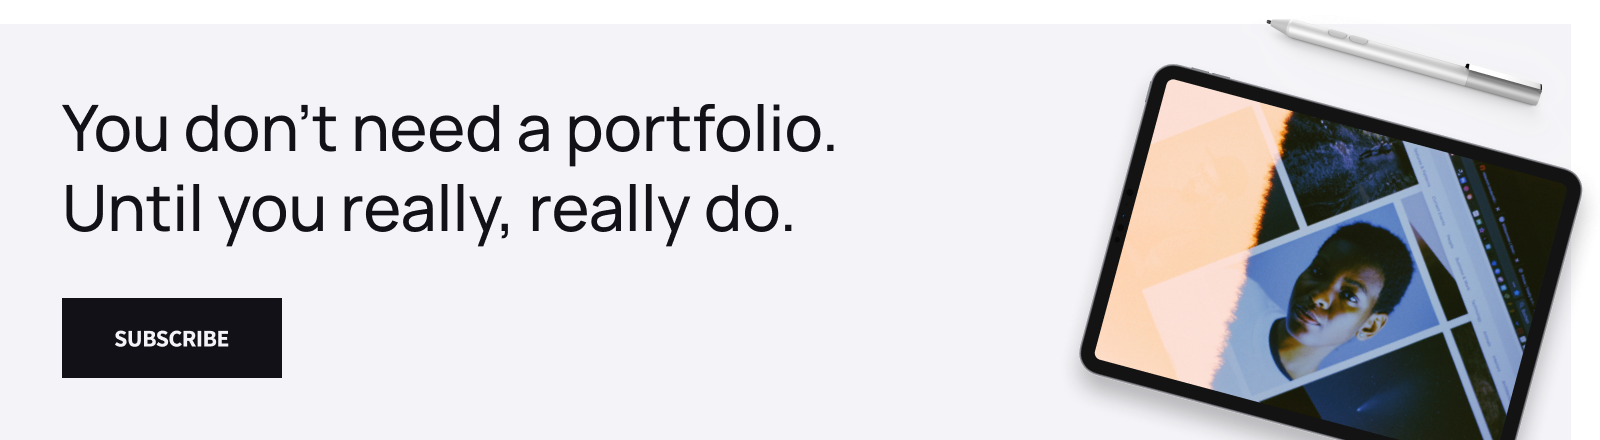 A banner saying "You don't need a portfolio. Until you really, really do." with a subscribe button.